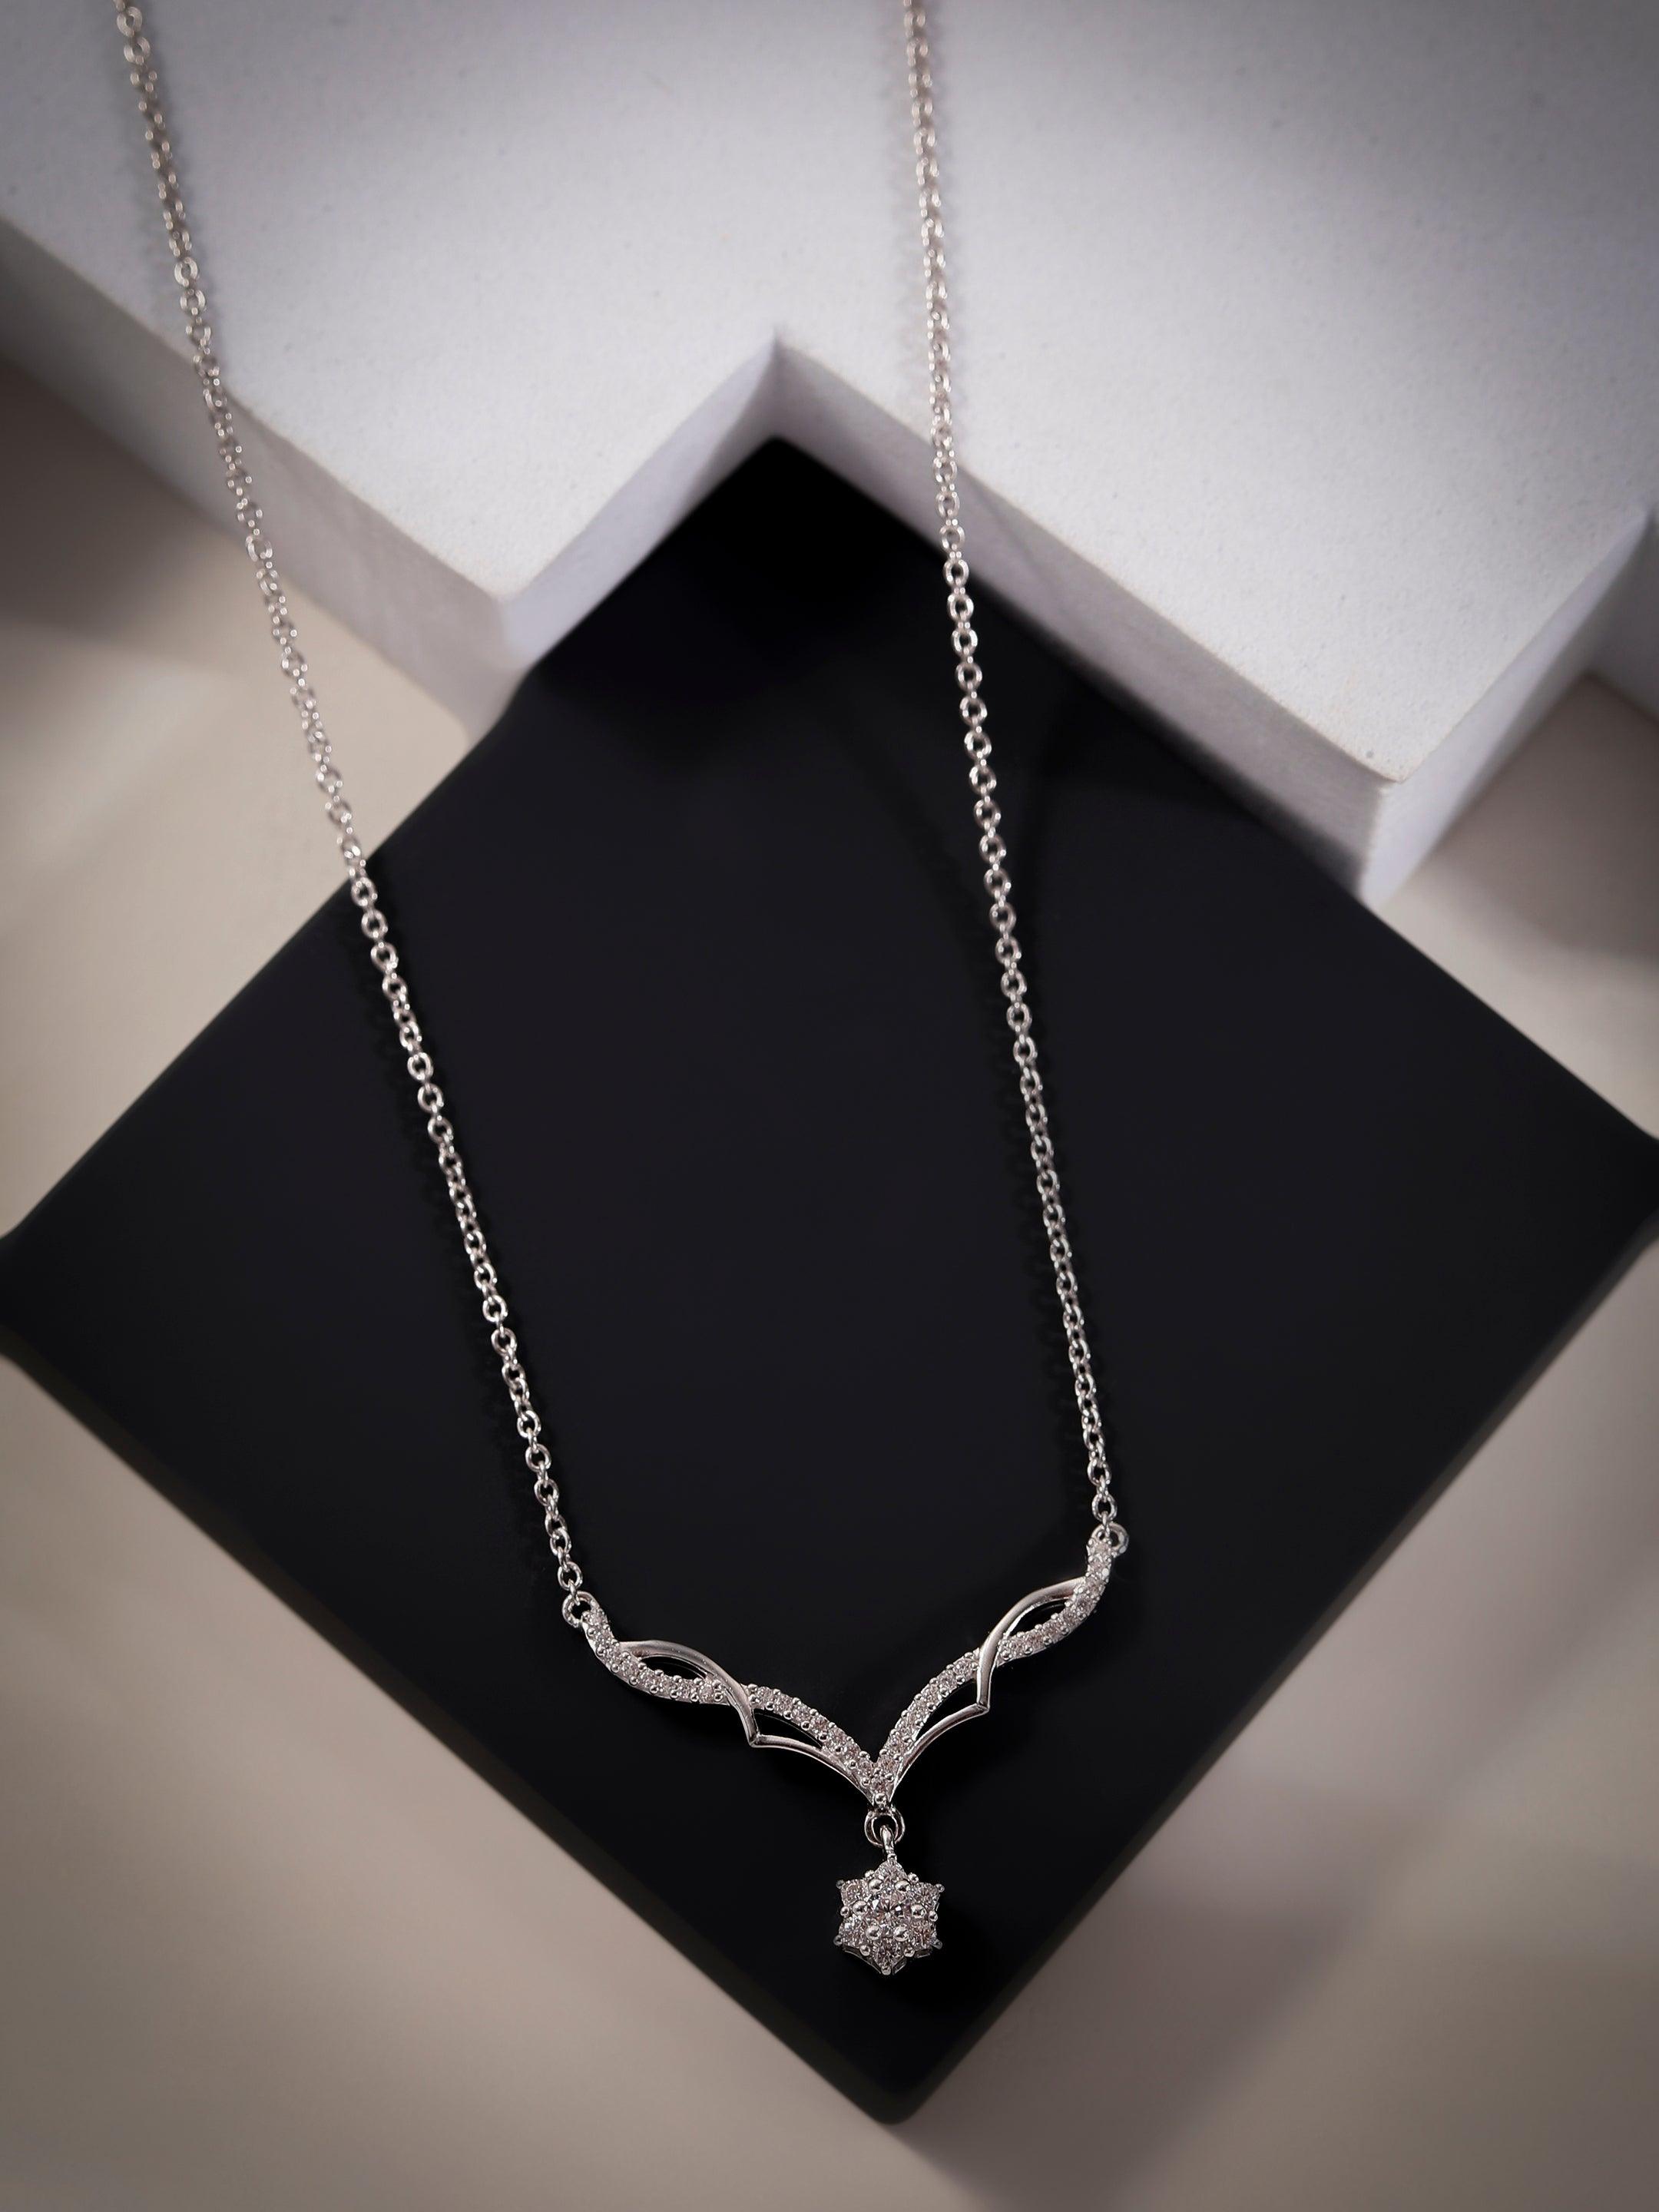 The Joyful Floral Silver Necklace - Diavo Jewels